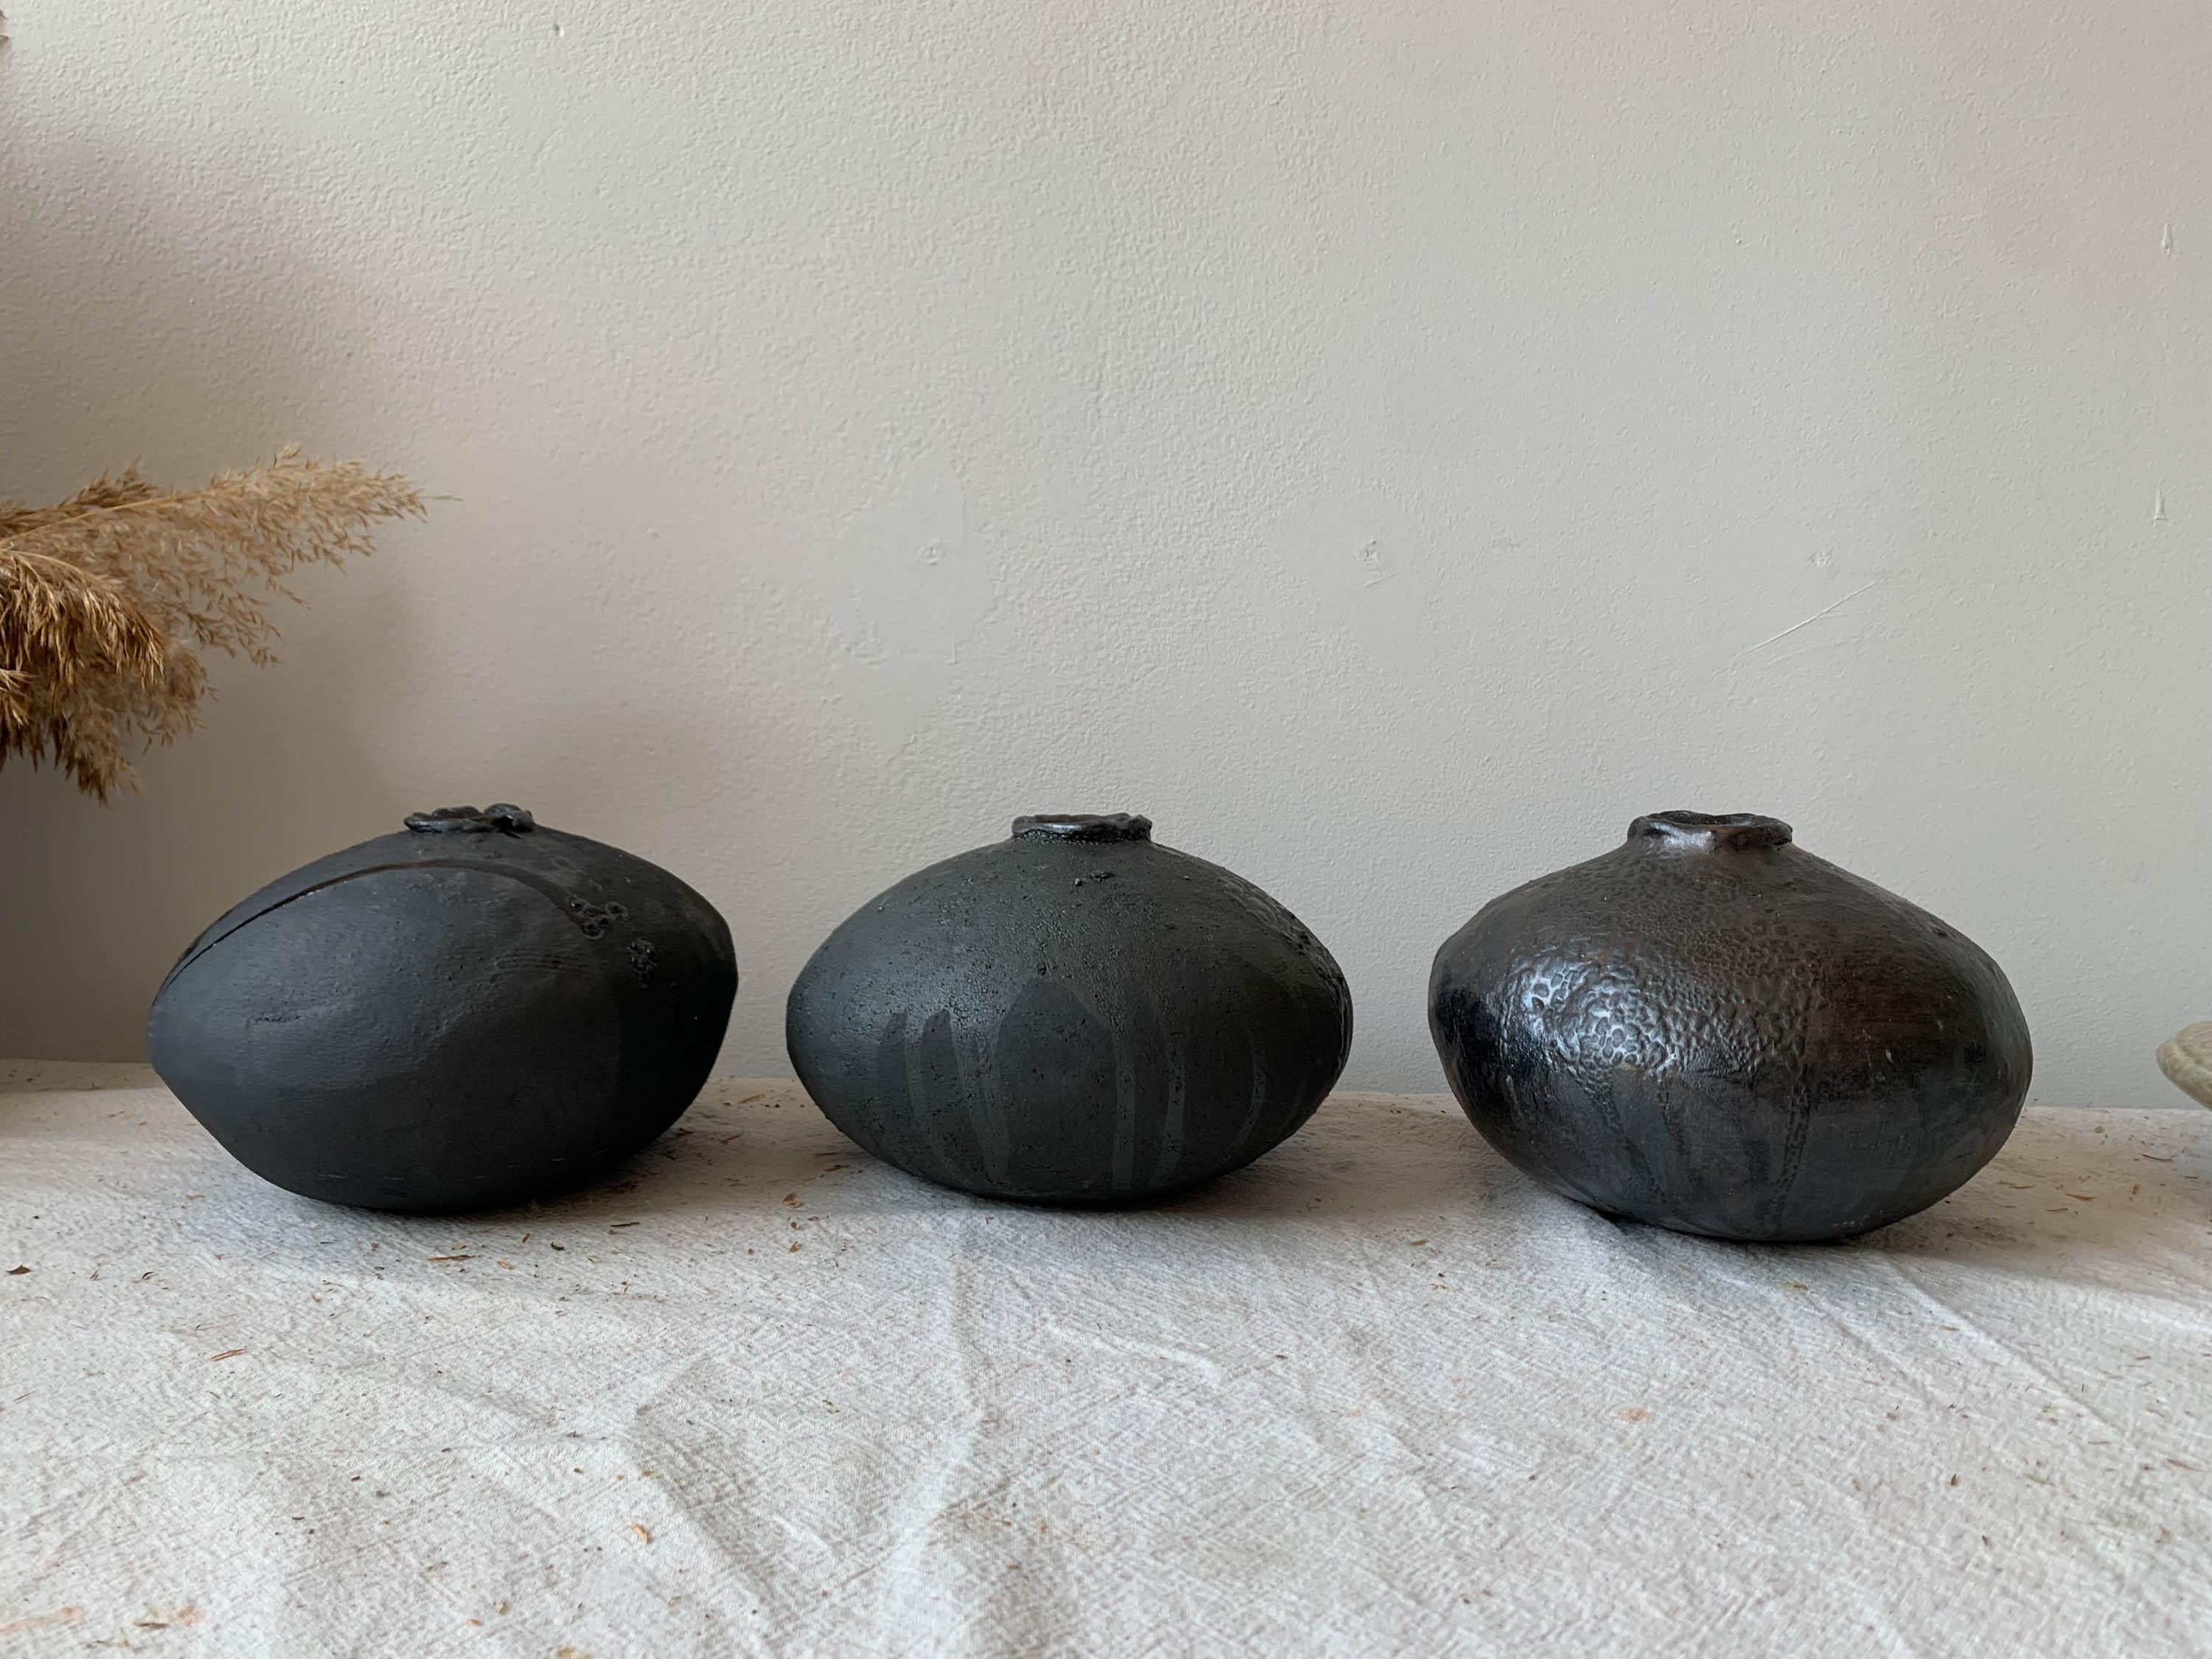 Handbuilt organic modern vase made from a groggy clay body covered in a matte black glaze with layers of glossy and crawling black glaze on top. Each vase is made by hand in our Brooklyn studio, and no two are ever exactly alike. The new moon vase